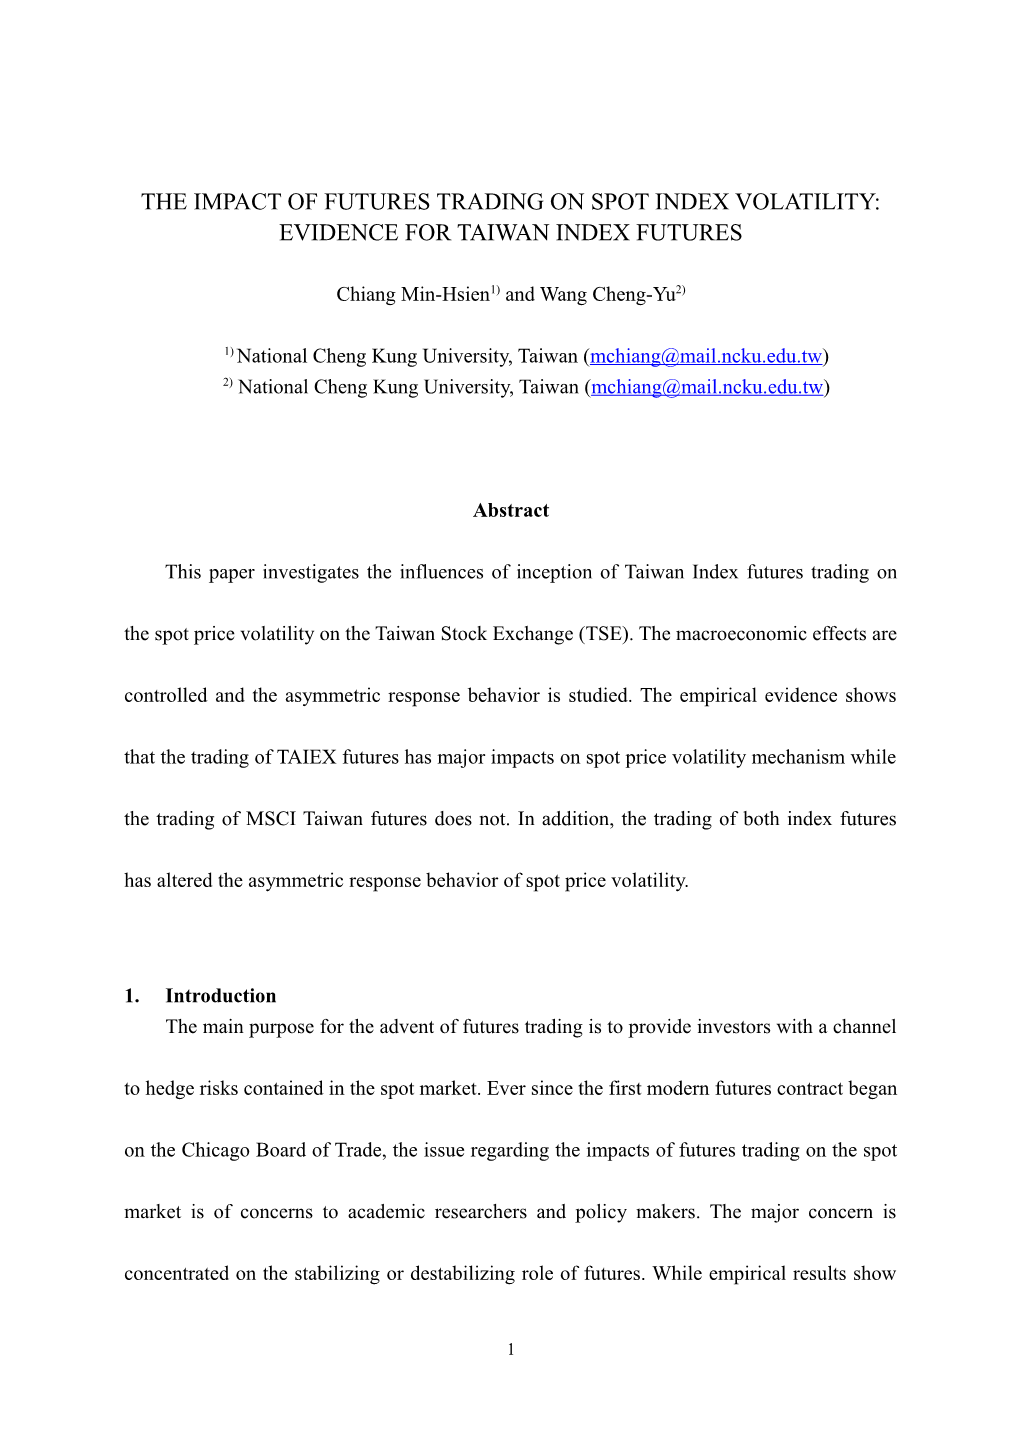 The Impact of Futures Trading on Spot Index Volatility: Evidence for Taiwan Index Futures